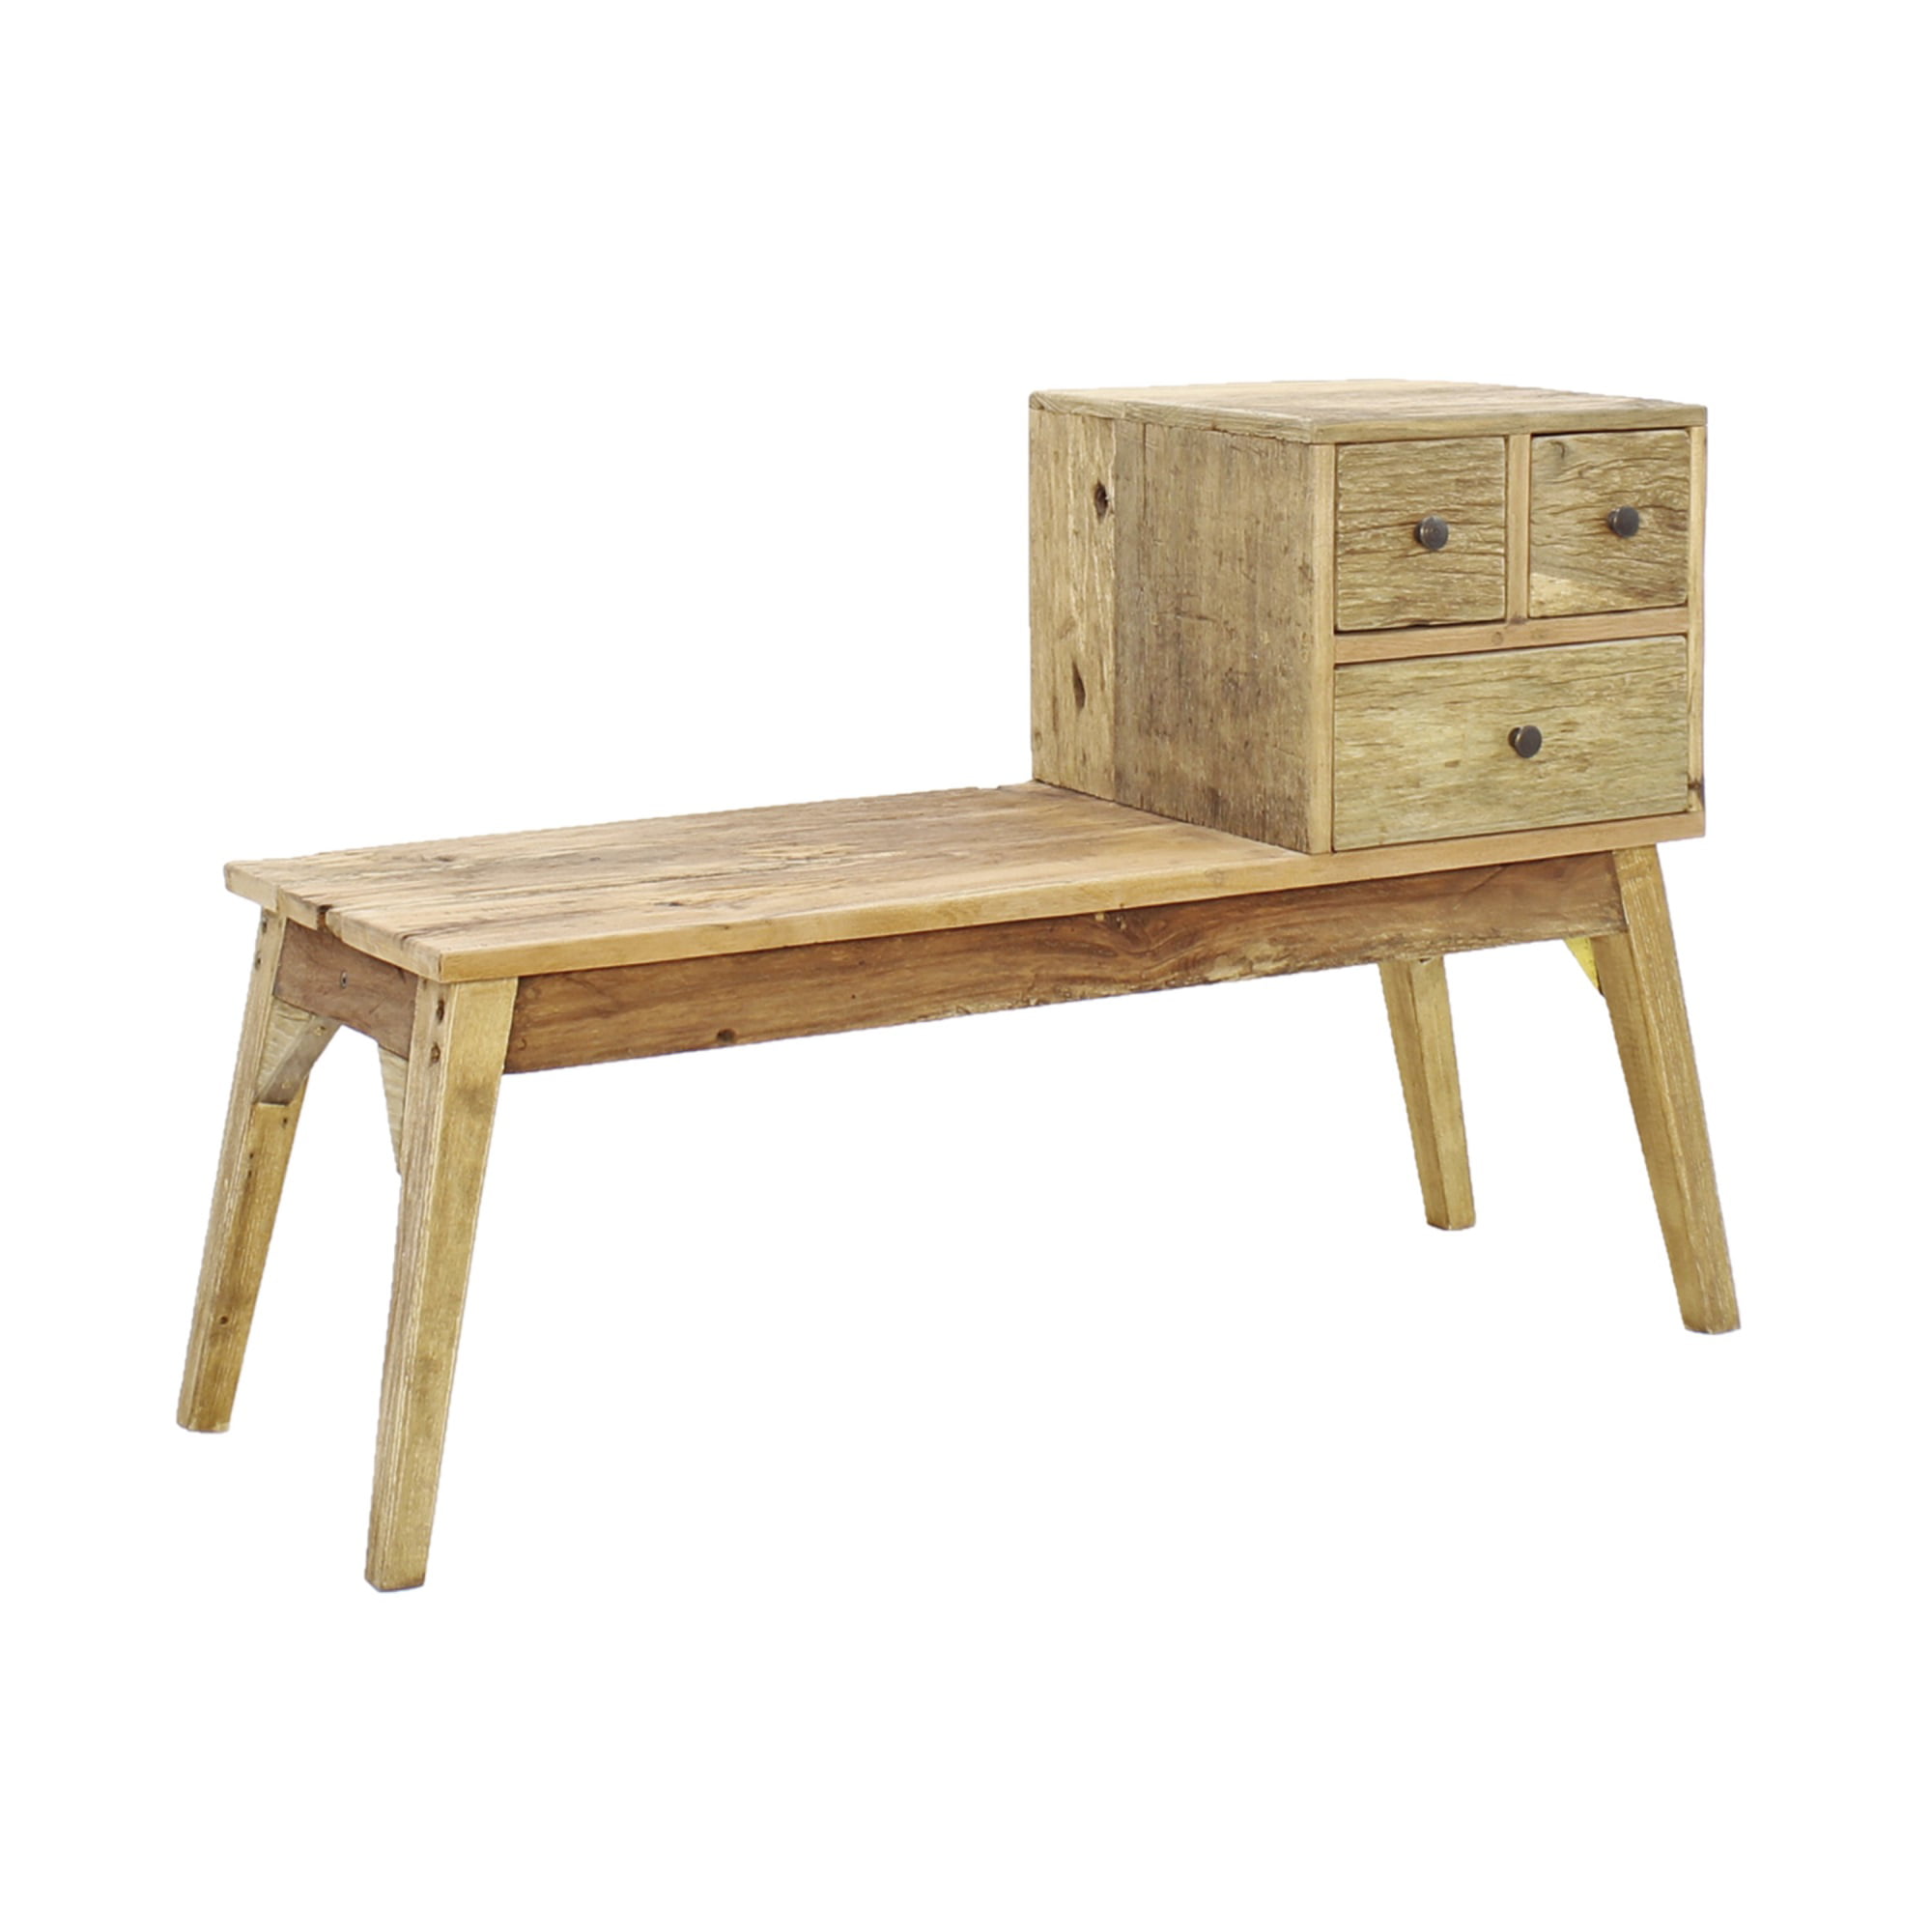 Picture of 4D Concepts 684100 Java Bench with Drawers, Rustic Natural